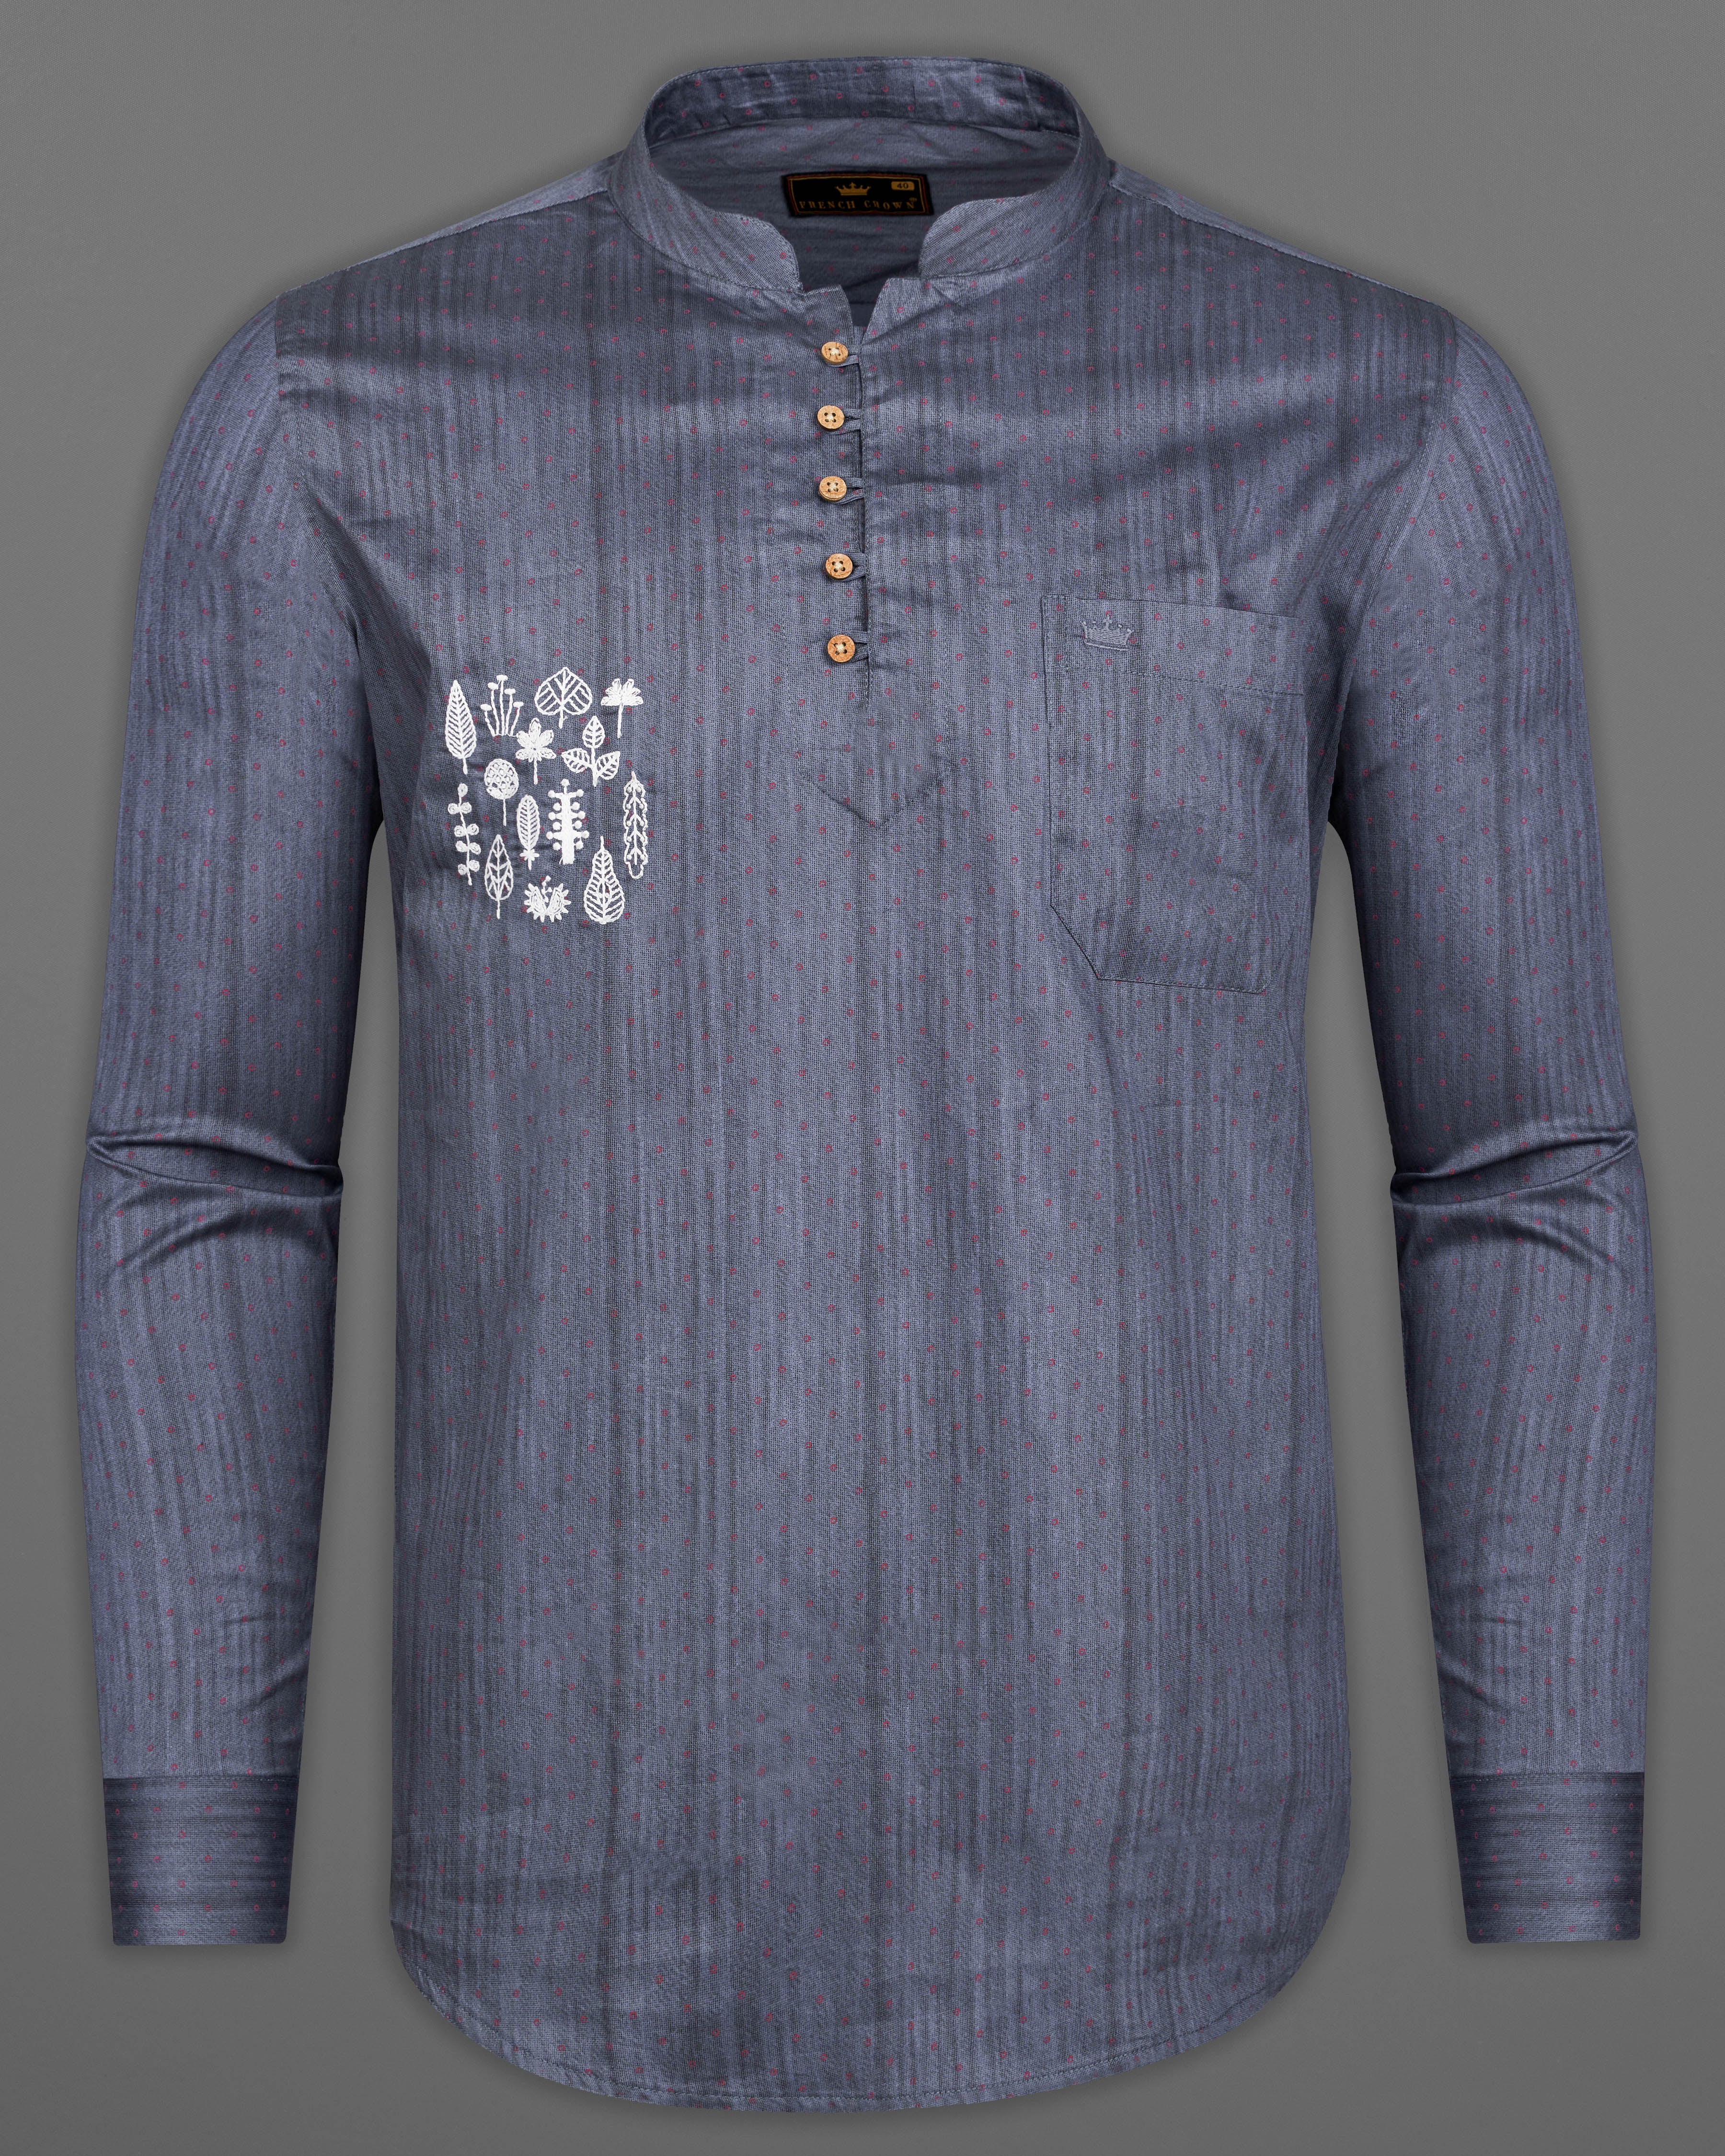 Cadet Gray with White Emroidered Luxurious Linen Kurta Designer Shirt 6281-KS-E059-38, 6281-KS-E059-H-38, 6281-KS-E059-39, 6281-KS-E059-H-39, 6281-KS-E059-40, 6281-KS-E059-H-40, 6281-KS-E059-42, 6281-KS-E059-H-42, 6281-KS-E059-44, 6281-KS-E059-H-44, 6281-KS-E059-46, 6281-KS-E059-H-46, 6281-KS-E059-48, 6281-KS-E059-H-48, 6281-KS-E059-50, 6281-KS-E059-H-50, 6281-KS-E059-52, 6281-KS-E059-H-52